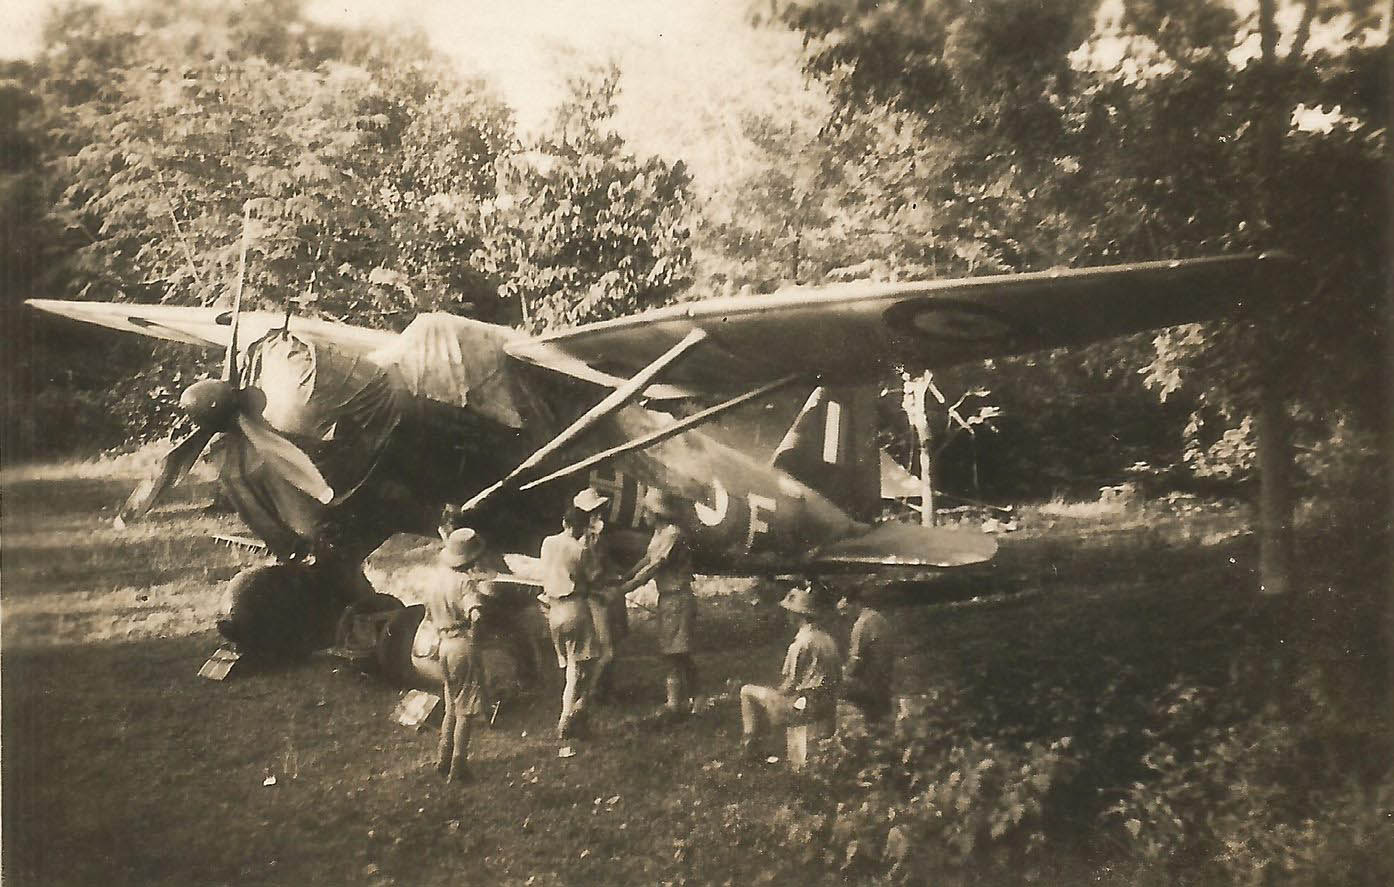 A Squadron Westland Lysander II seen here at Tezpur in 1942